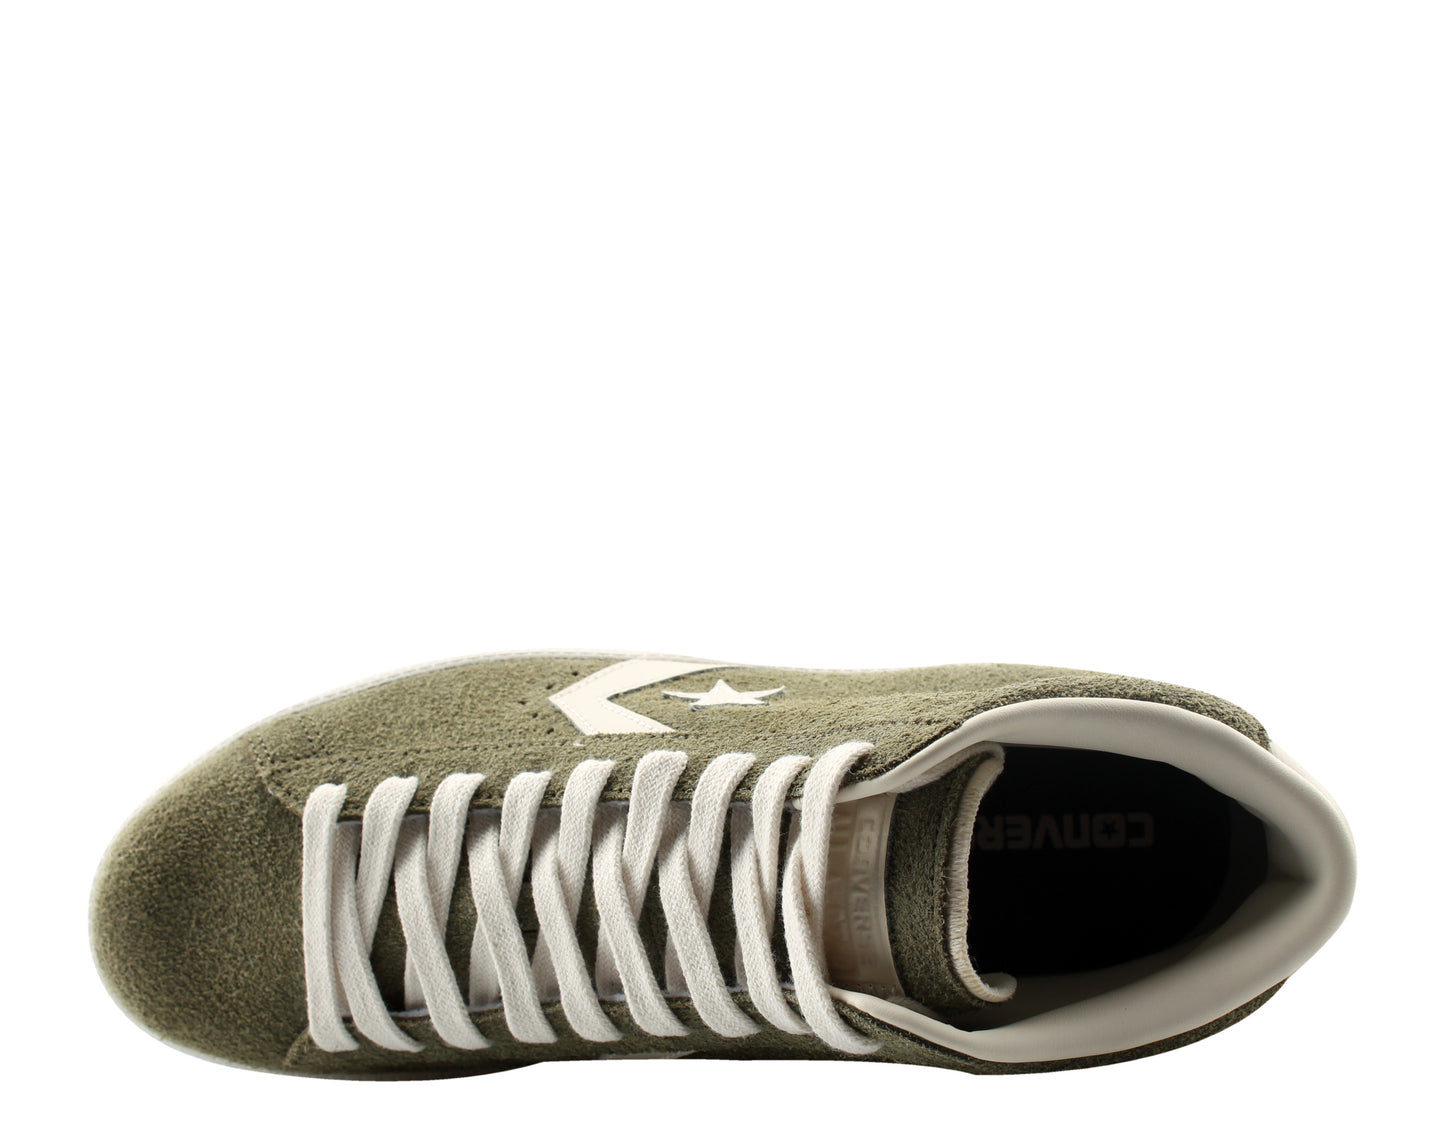 Converse CT AS Pro Leather Mid Medium Olive/Egret Men's Sneakers 157690C